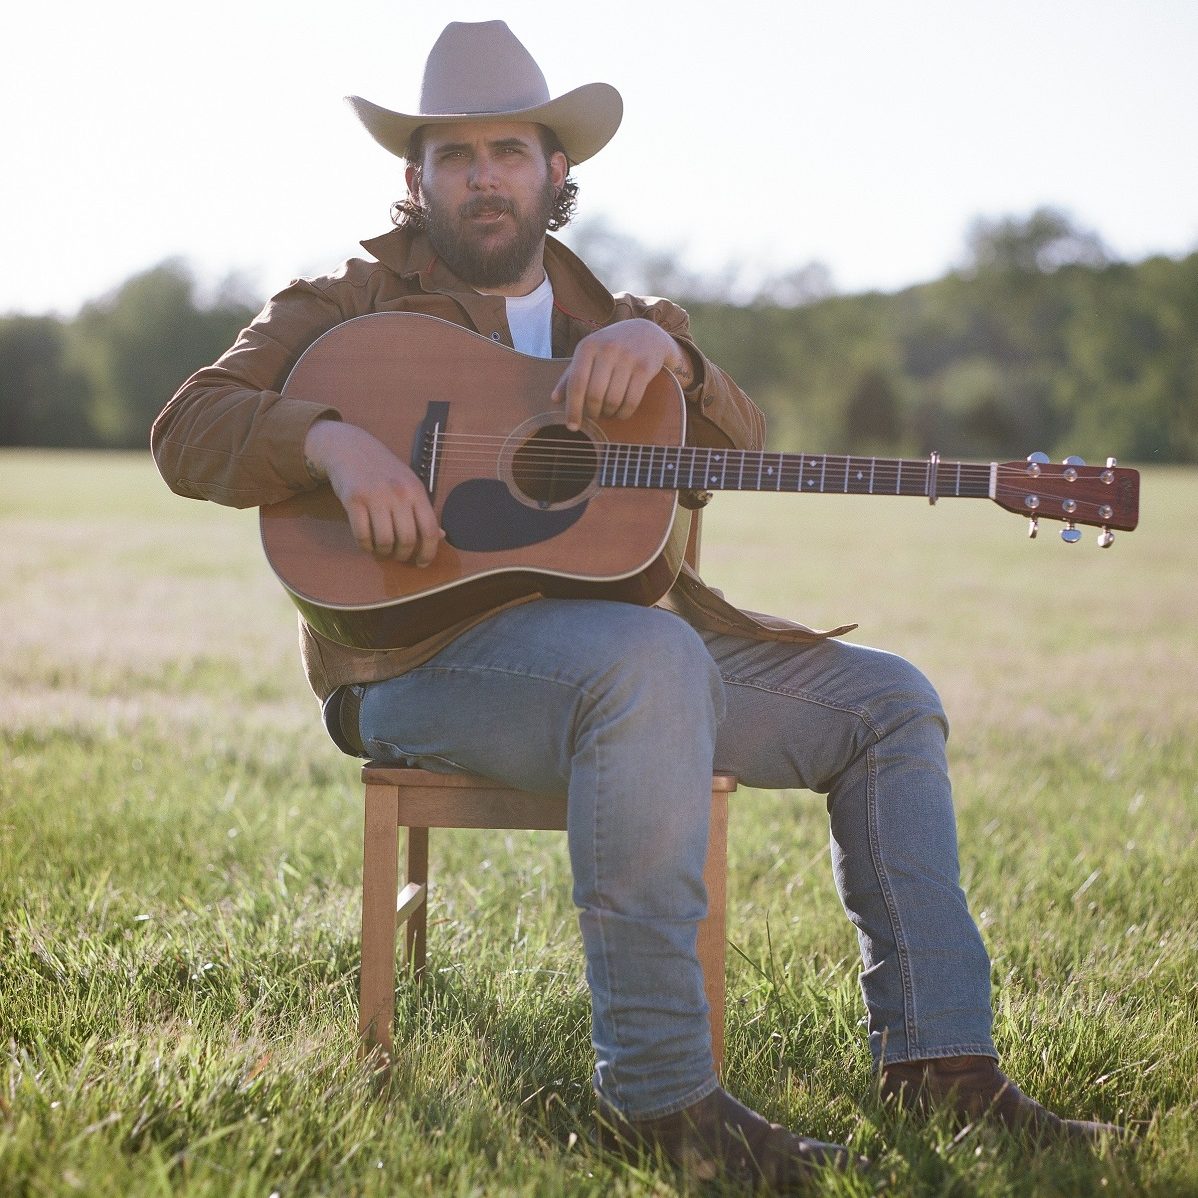 With a New Album About His Turbulent Past, Waylon Payne Makes It Through